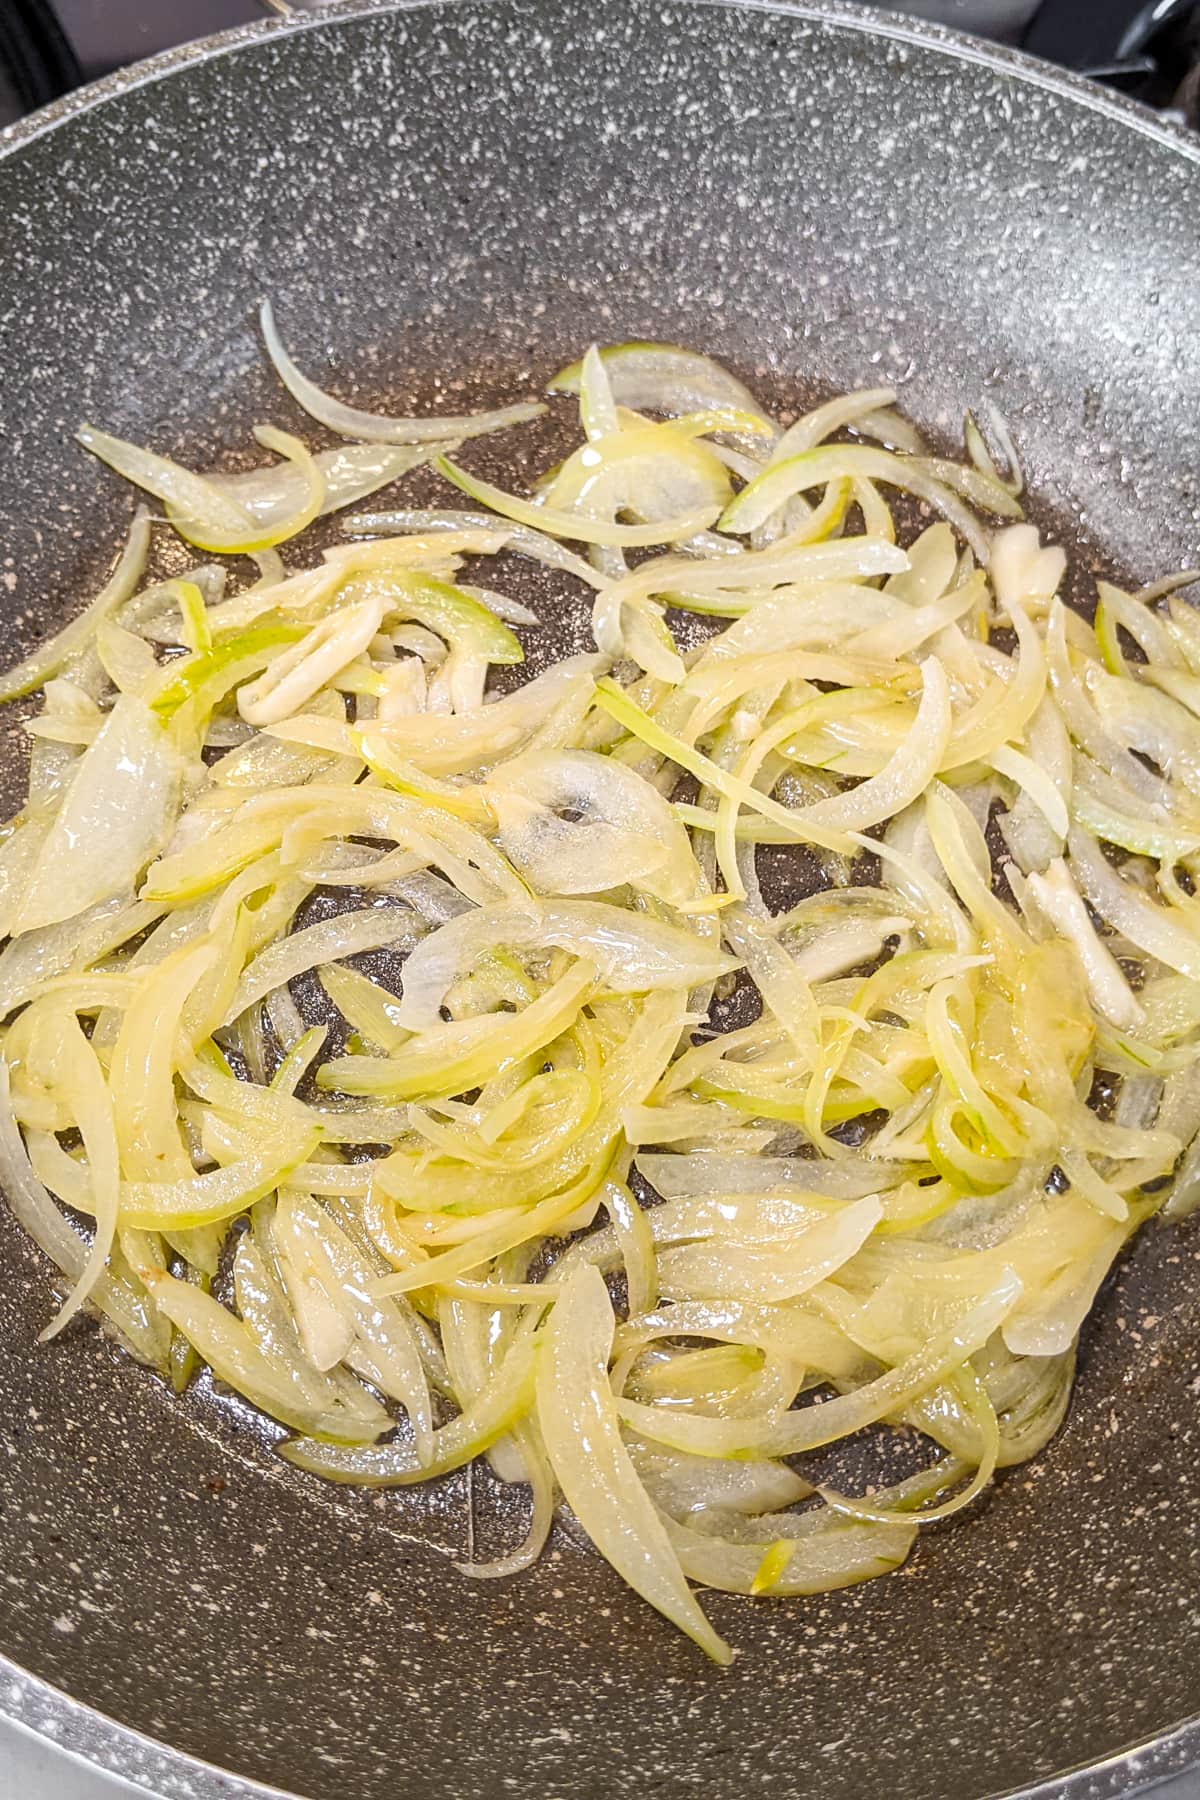 Fried onions in a frying pan on the stove.